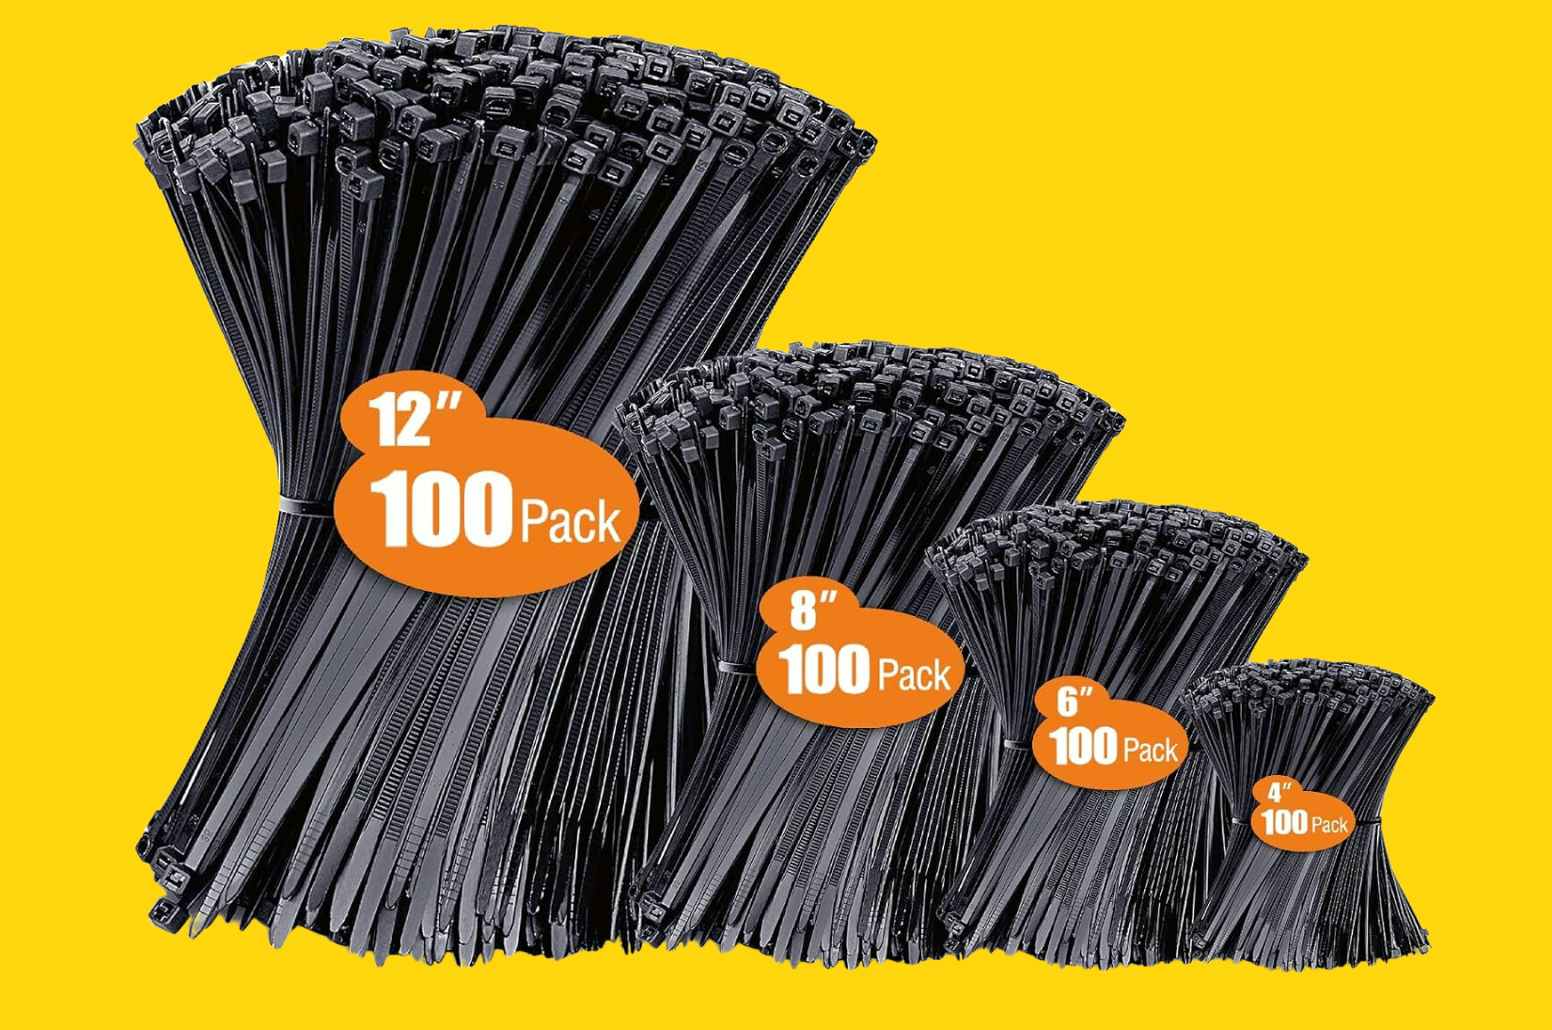 Get 400 Zip Ties in Assorted Sizes for Just $5.69 on Amazon